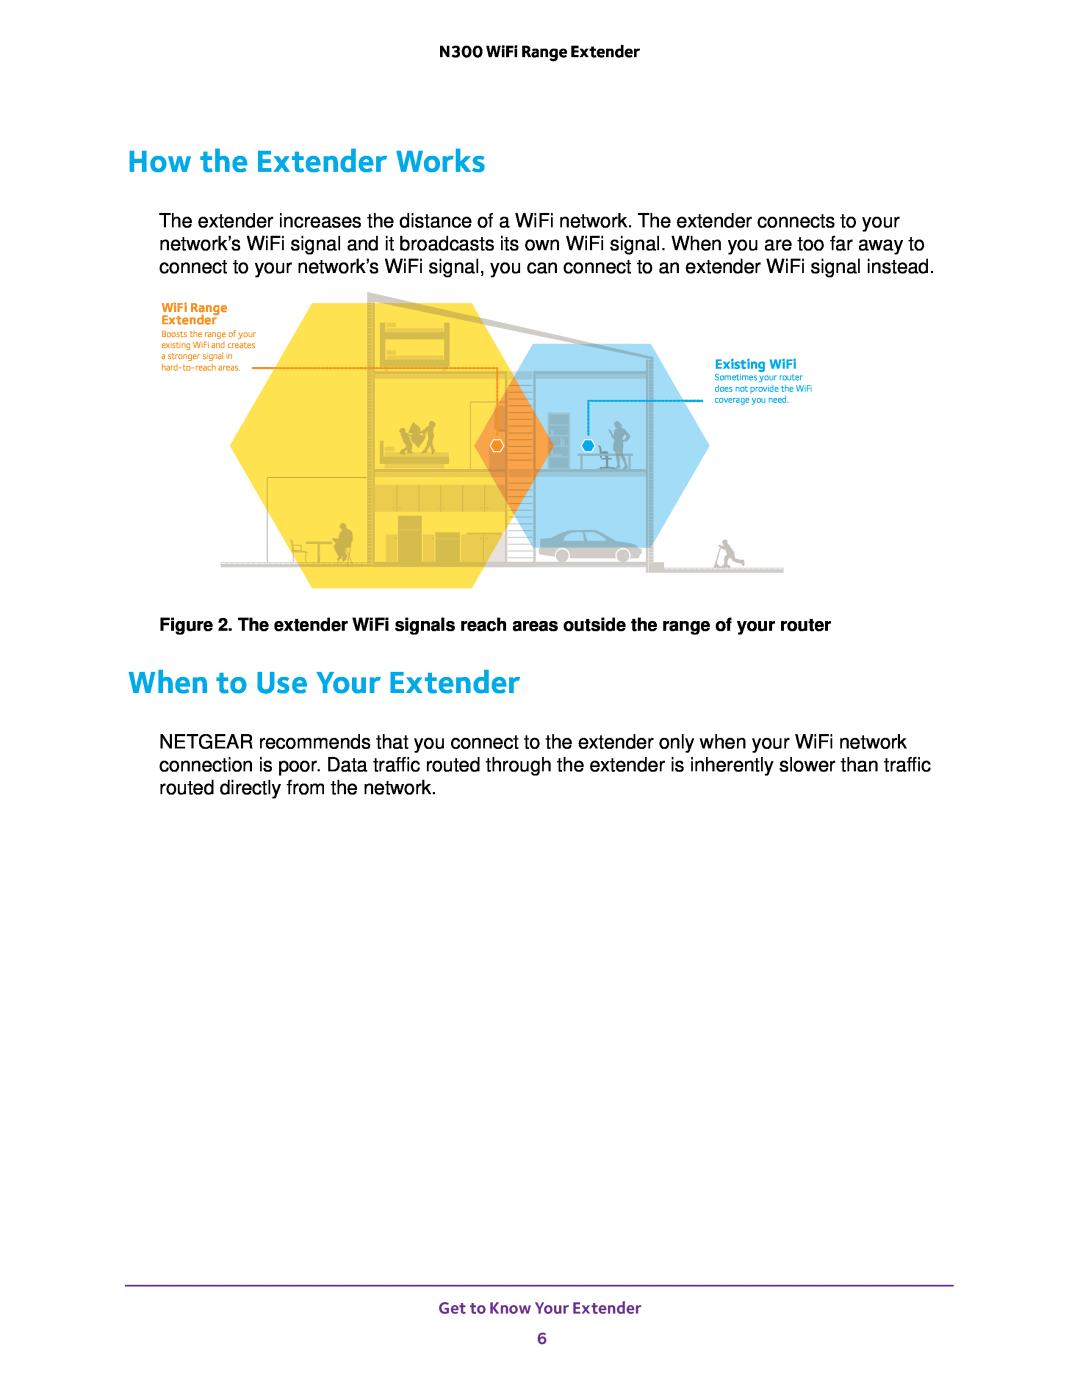 NETGEAR EX2700 user manual How the Extender Works, When to Use Your Extender, Existing WiFi 